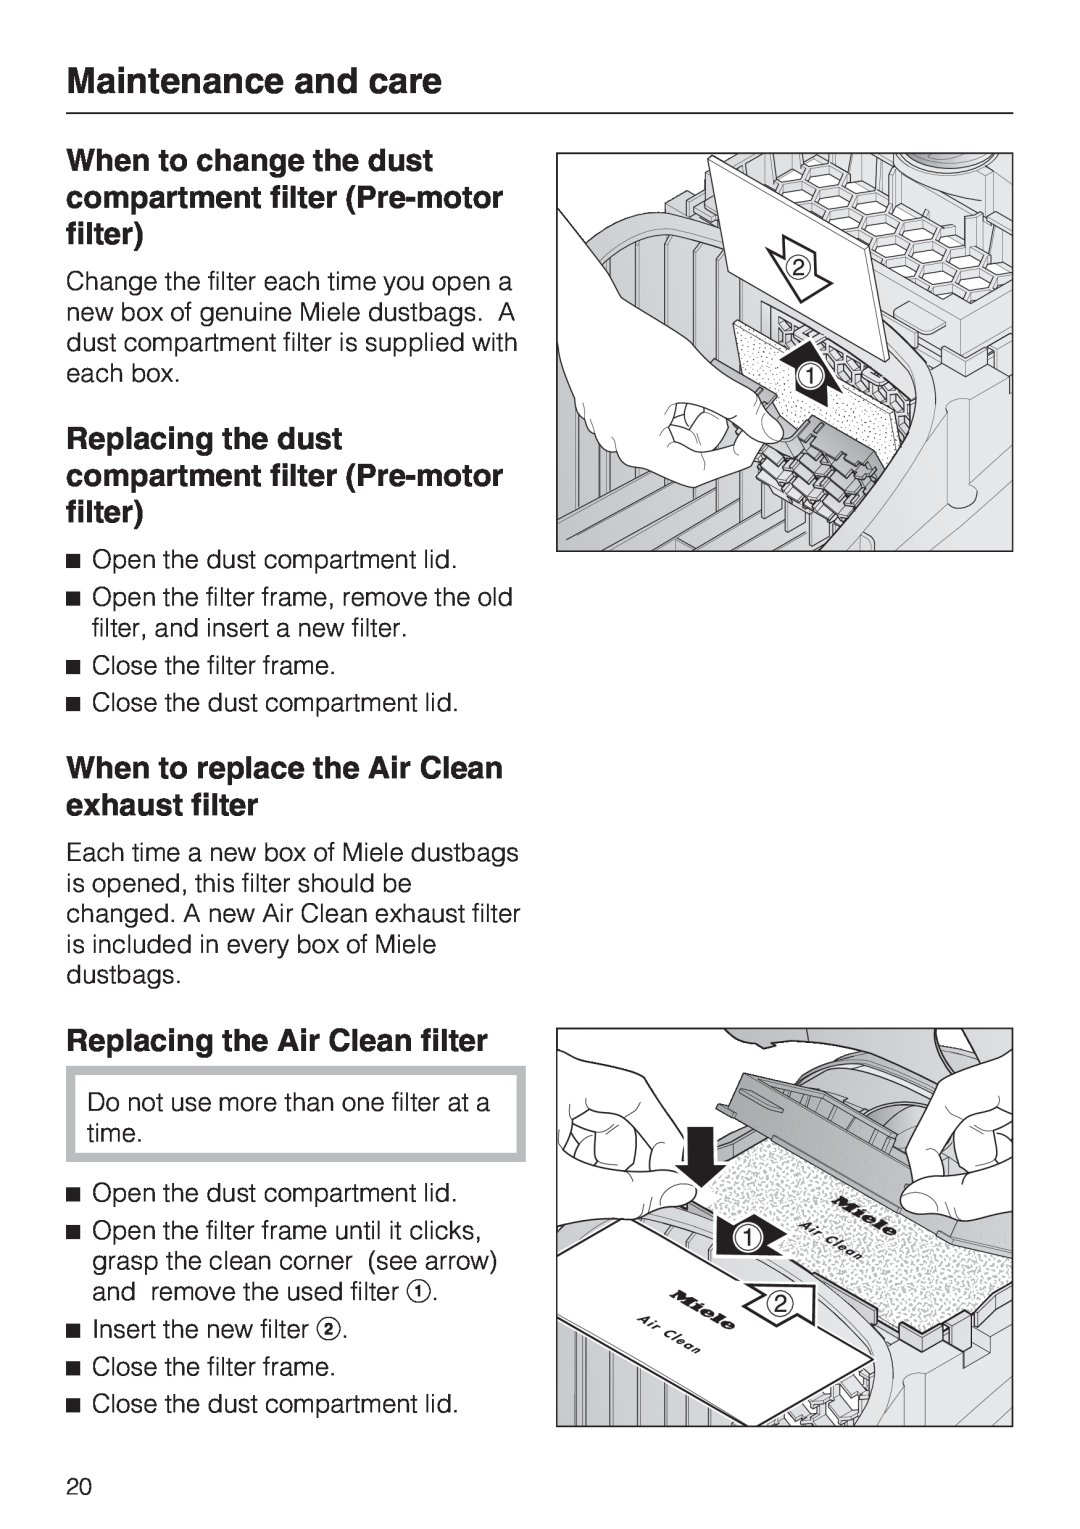 Miele S 2120, S 2000 When to replace the Air Clean exhaust filter, Replacing the Air Clean filter, Maintenance and care 